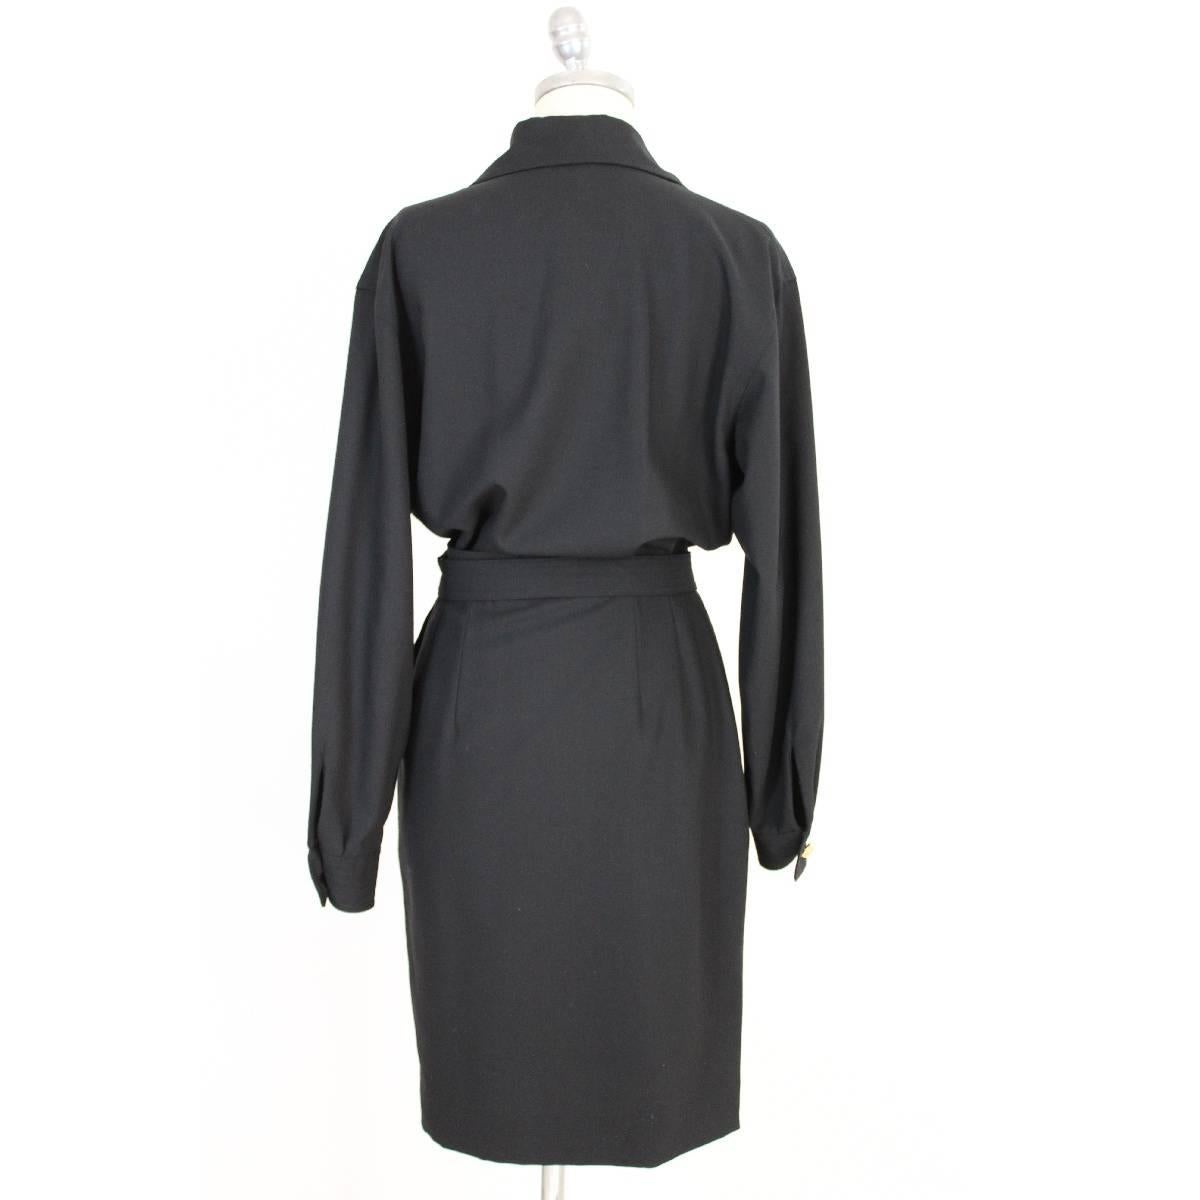 Salvatore Ferragamo black wool cocktail dress, new with label. Long sleeve dress, wallet skirt. Buttons gold color jewel. Waist belt with golden medallion with logo. Silk lined skirt. Two pockets on the sides. New with label. There are spare